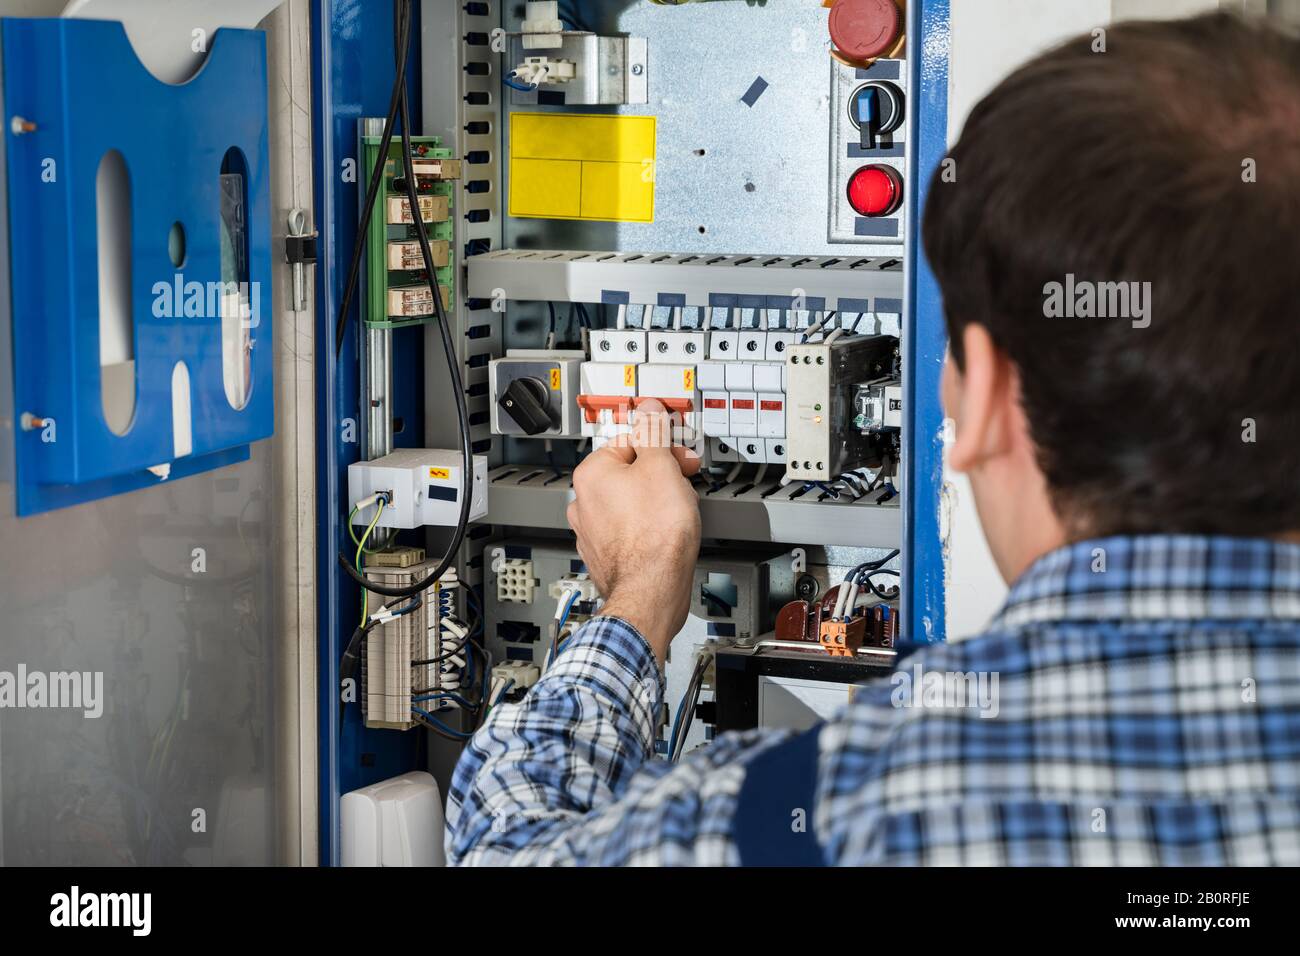 Photo Of Young Male Technician Examining Fusebox Stock Photo